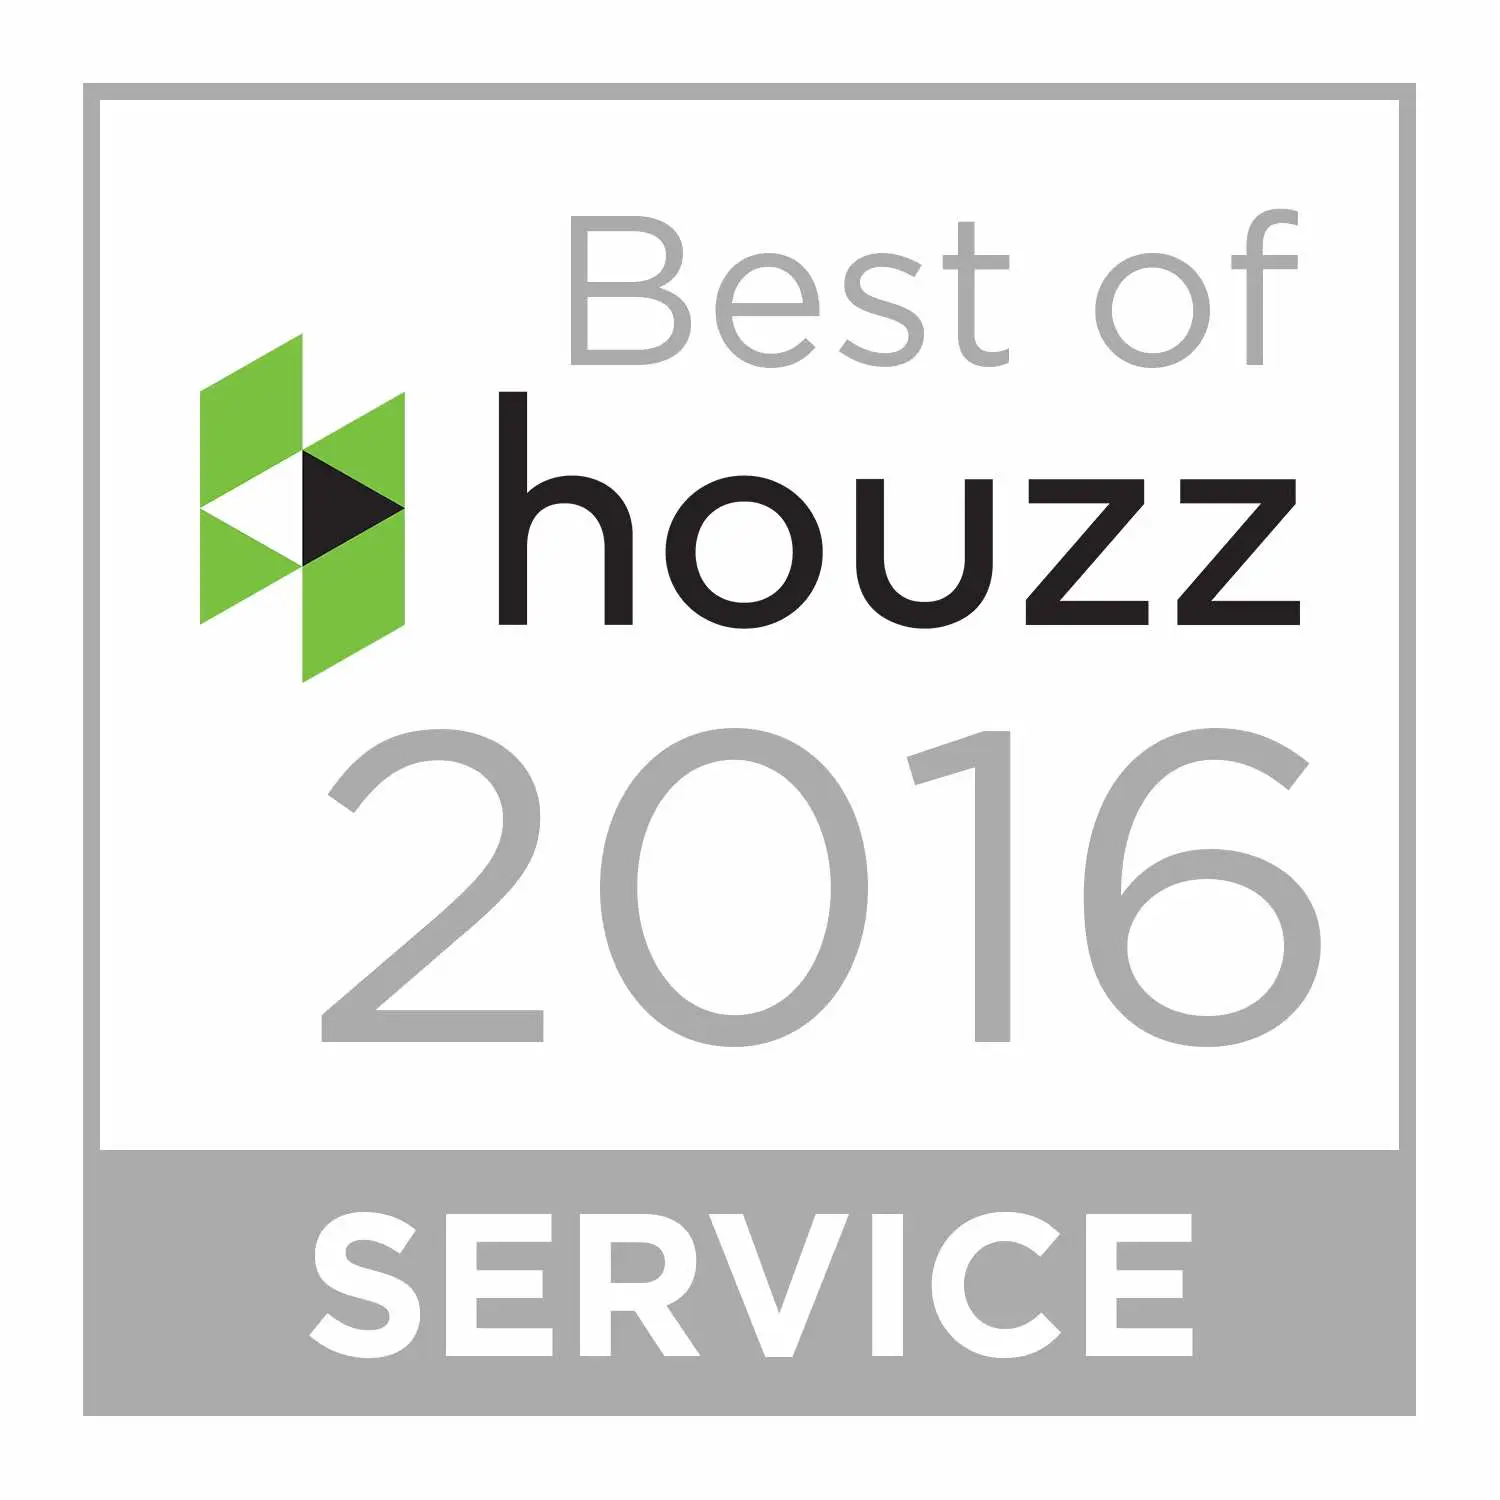 Wine Cellar Specialists win Best of Houzz in 2016 for Service